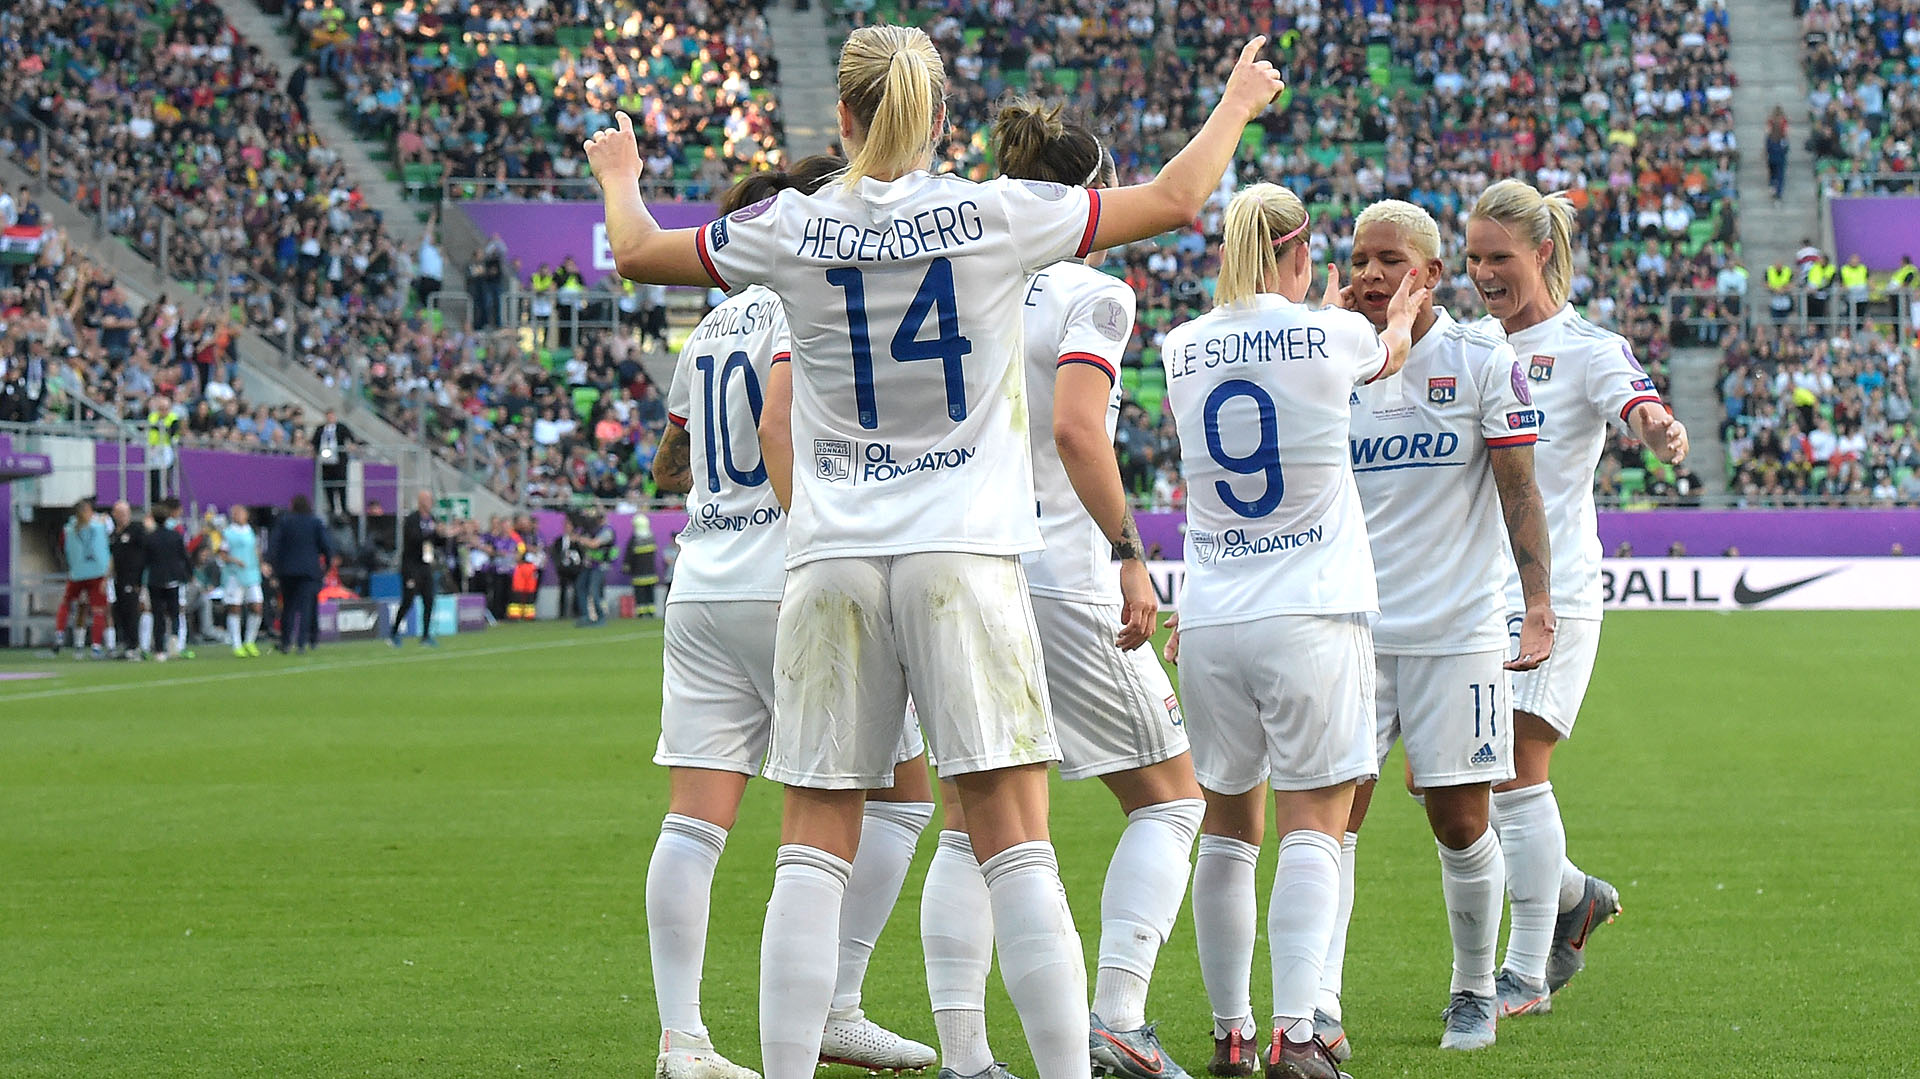 Lyon’s Norwegian striker Ada Hegerberg (C) celebrates scoring with her team-mates during the UEFA Women’s Champions League final football match Lyon v Barcelona in Budapest on May 18, 2019. (Photo by Tobias SCHWARZ / AFP)